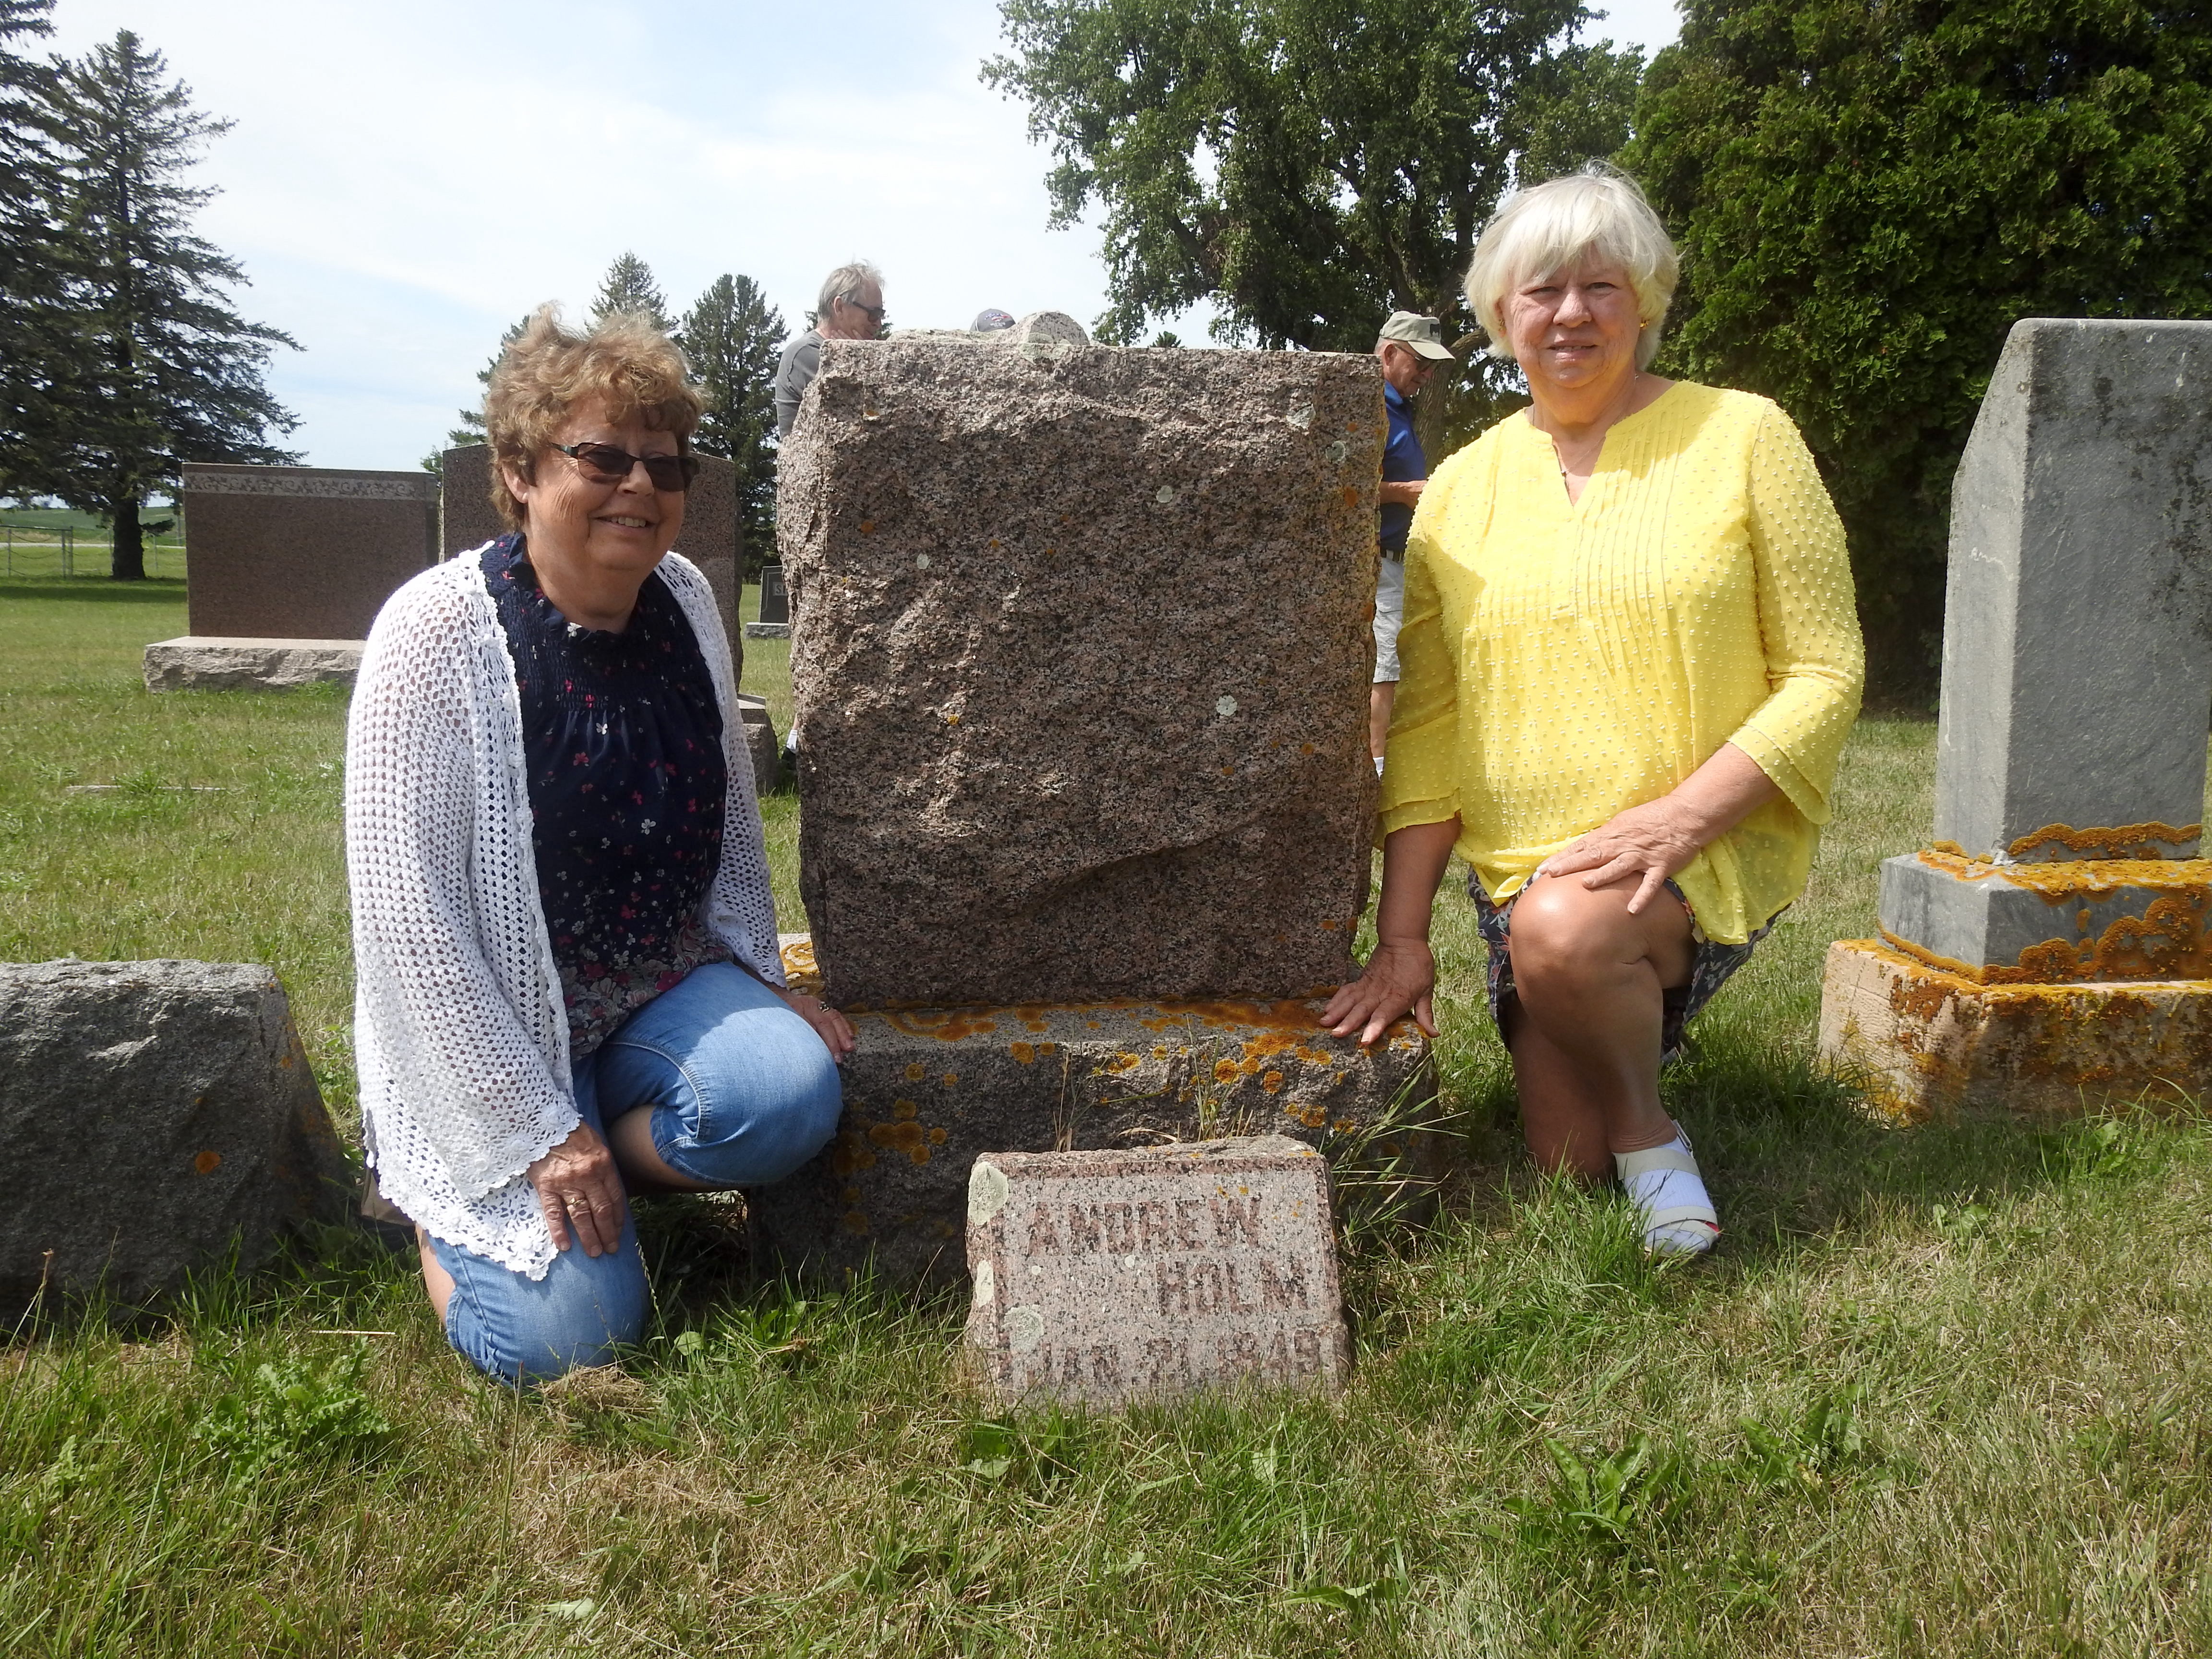 Norma Campbell and Eunice Helgeson kneeling by Andrew Holm’s marker